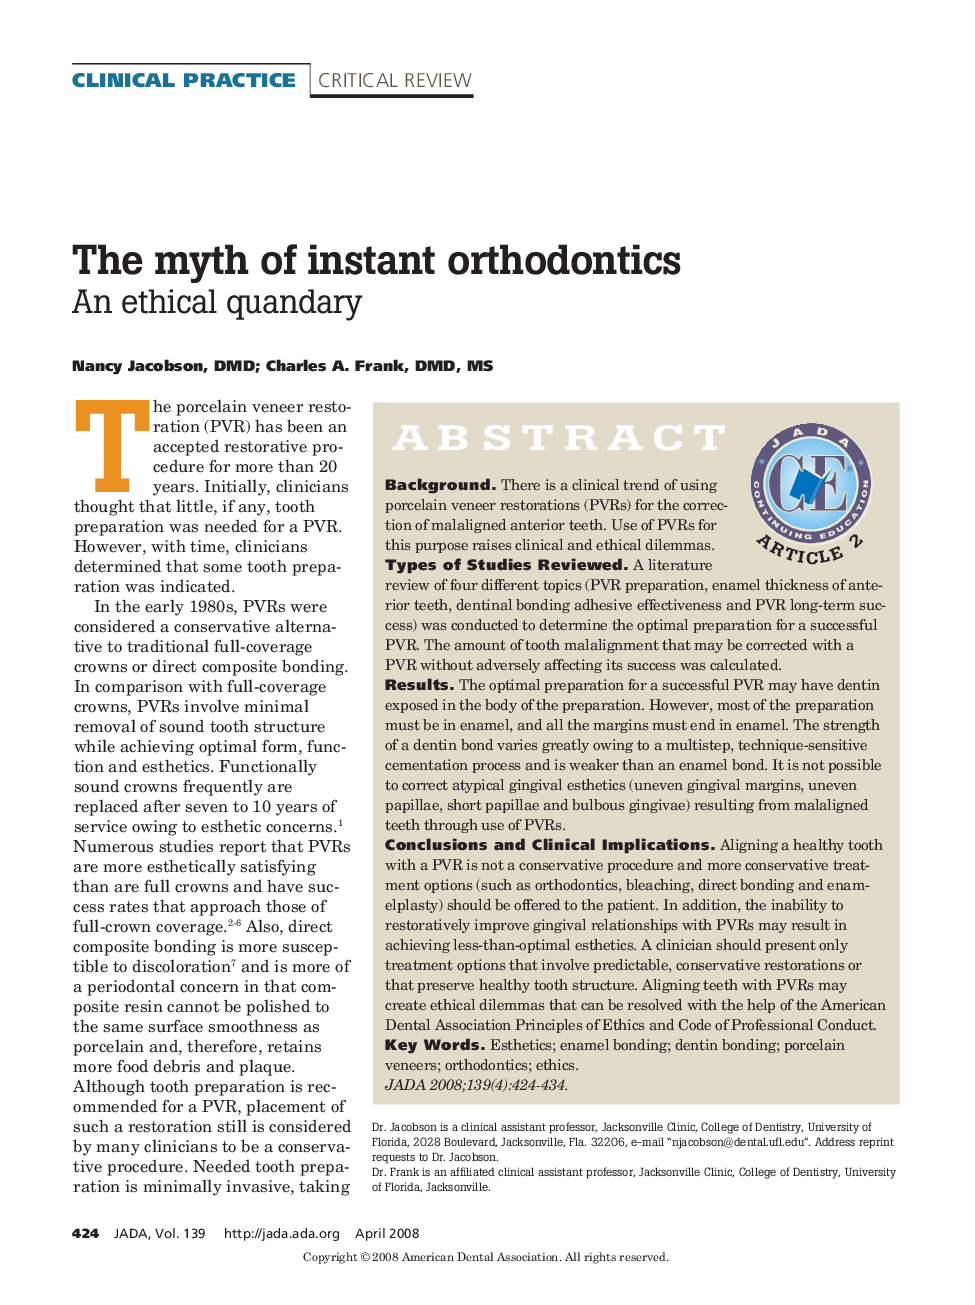 The Myth of Instant Orthodontics : An Ethical Quandary